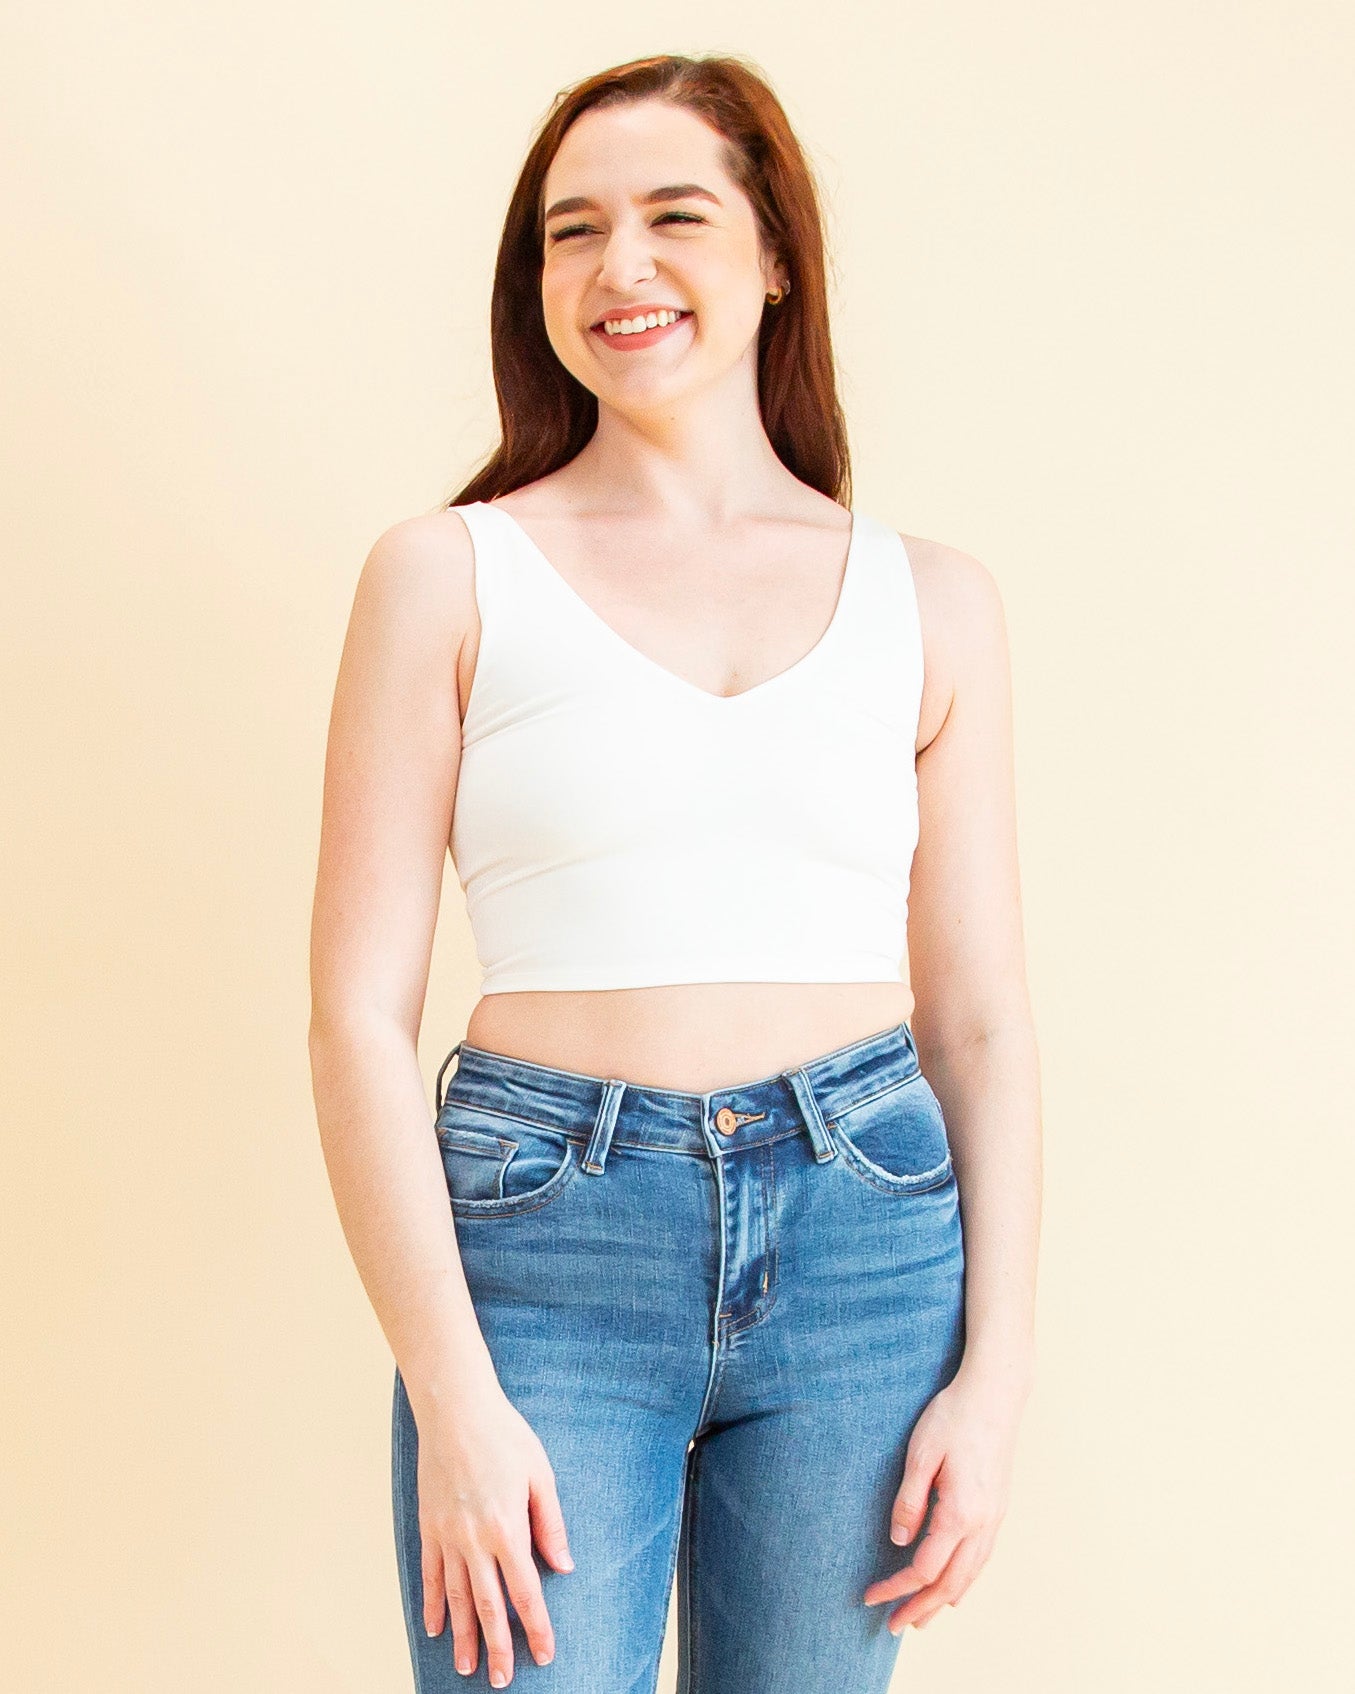 All This Time Crop Top in White (8589874790651)